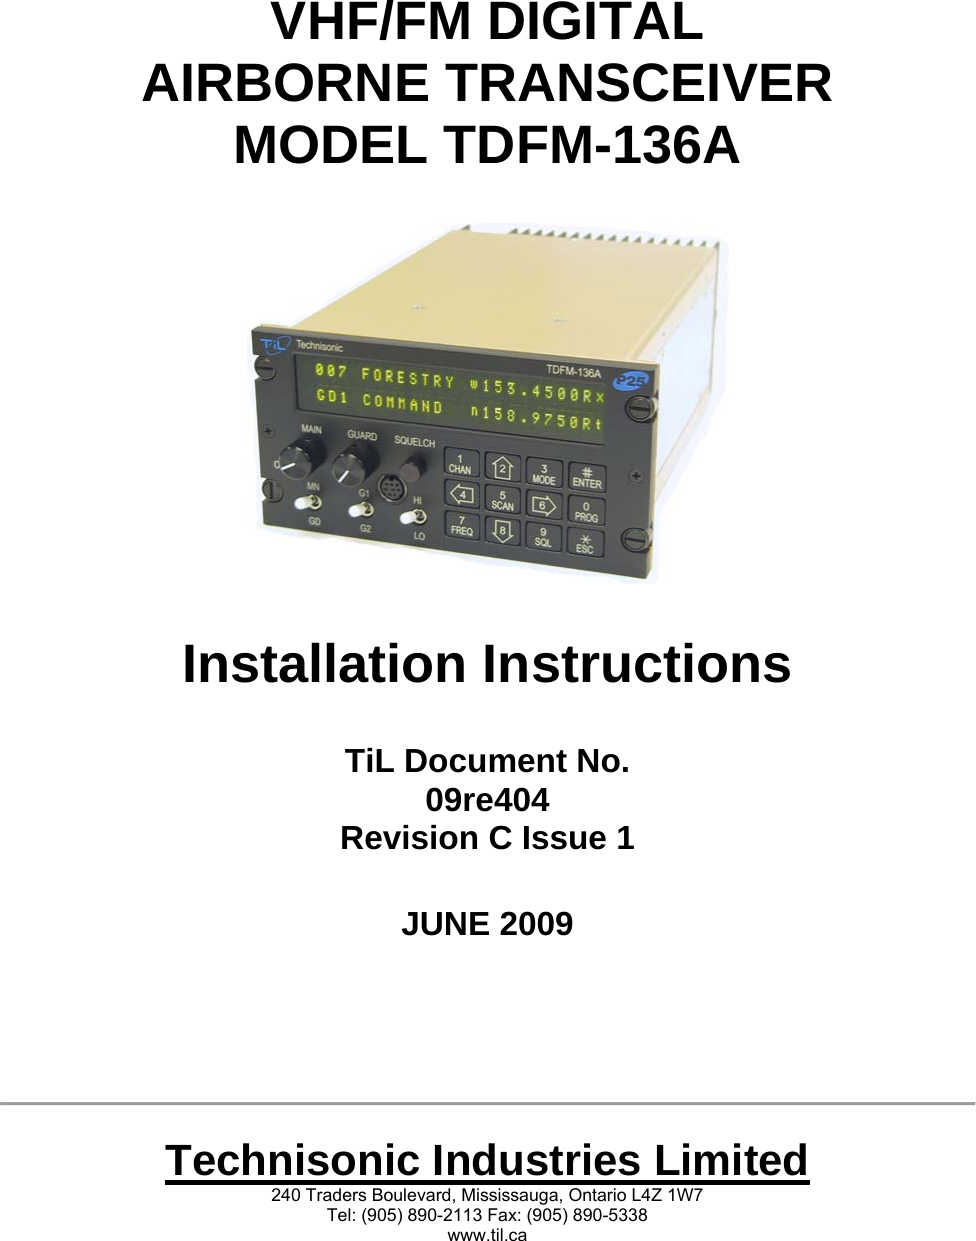    VHF/FM DIGITAL AIRBORNE TRANSCEIVER MODEL TDFM-136A      Installation Instructions   TiL Document No. 09re404 Revision C Issue 1   JUNE 2009         Technisonic Industries Limited 240 Traders Boulevard, Mississauga, Ontario L4Z 1W7 Tel: (905) 890-2113 Fax: (905) 890-5338 www.til.ca 